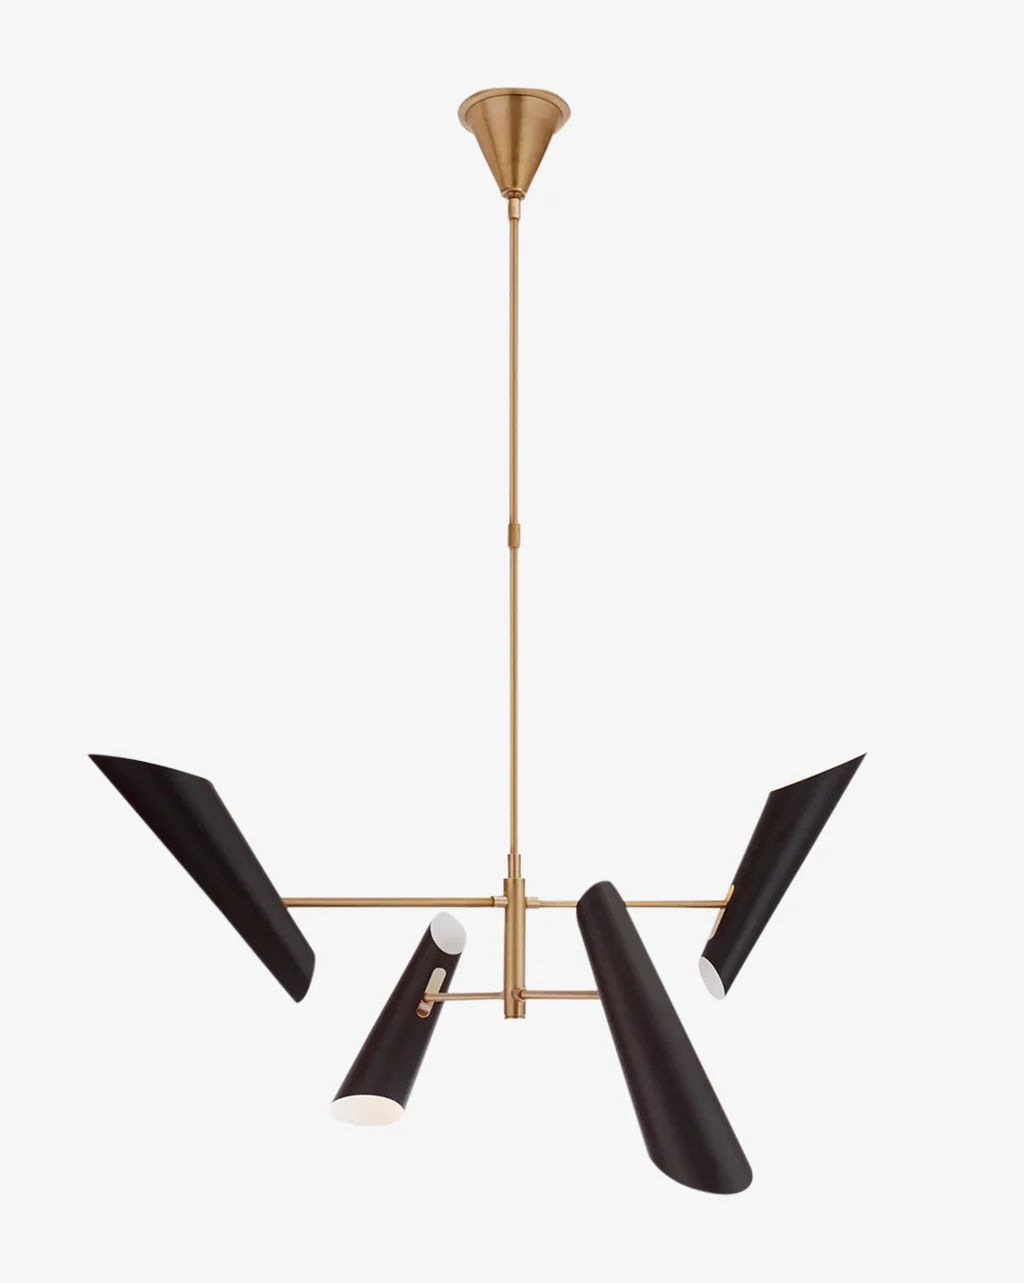 Franca Pivoting Chandelier | McGee & Co.